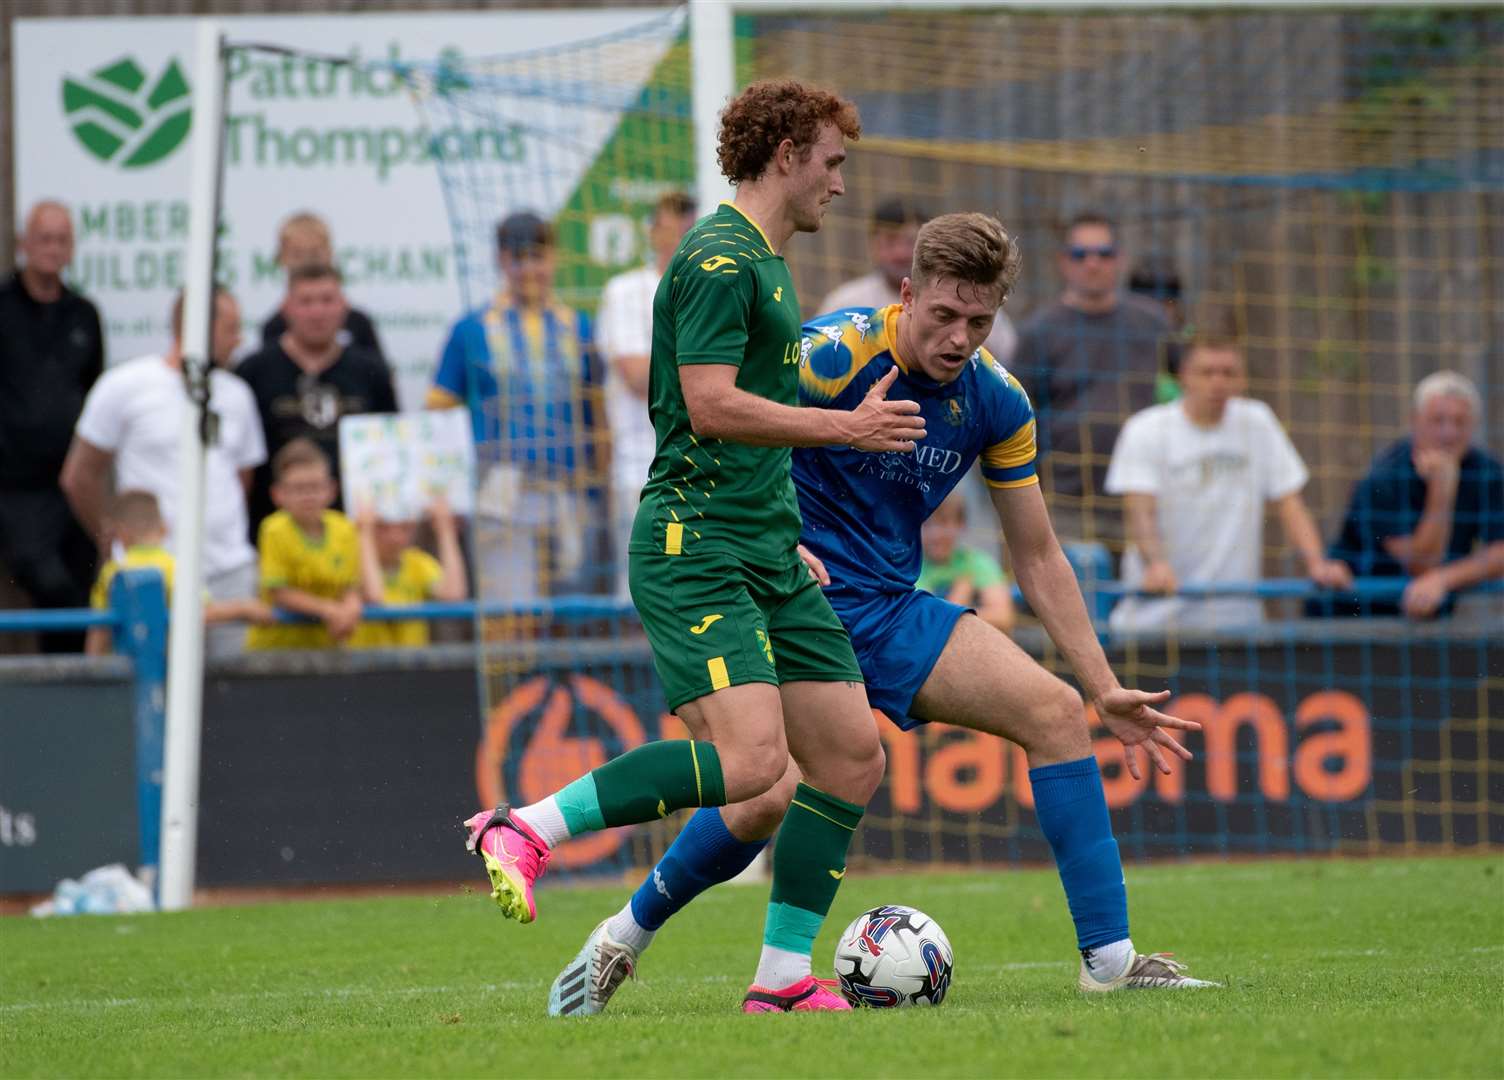 King's Lynn Town v Norwich City at The Walks on Saturday.